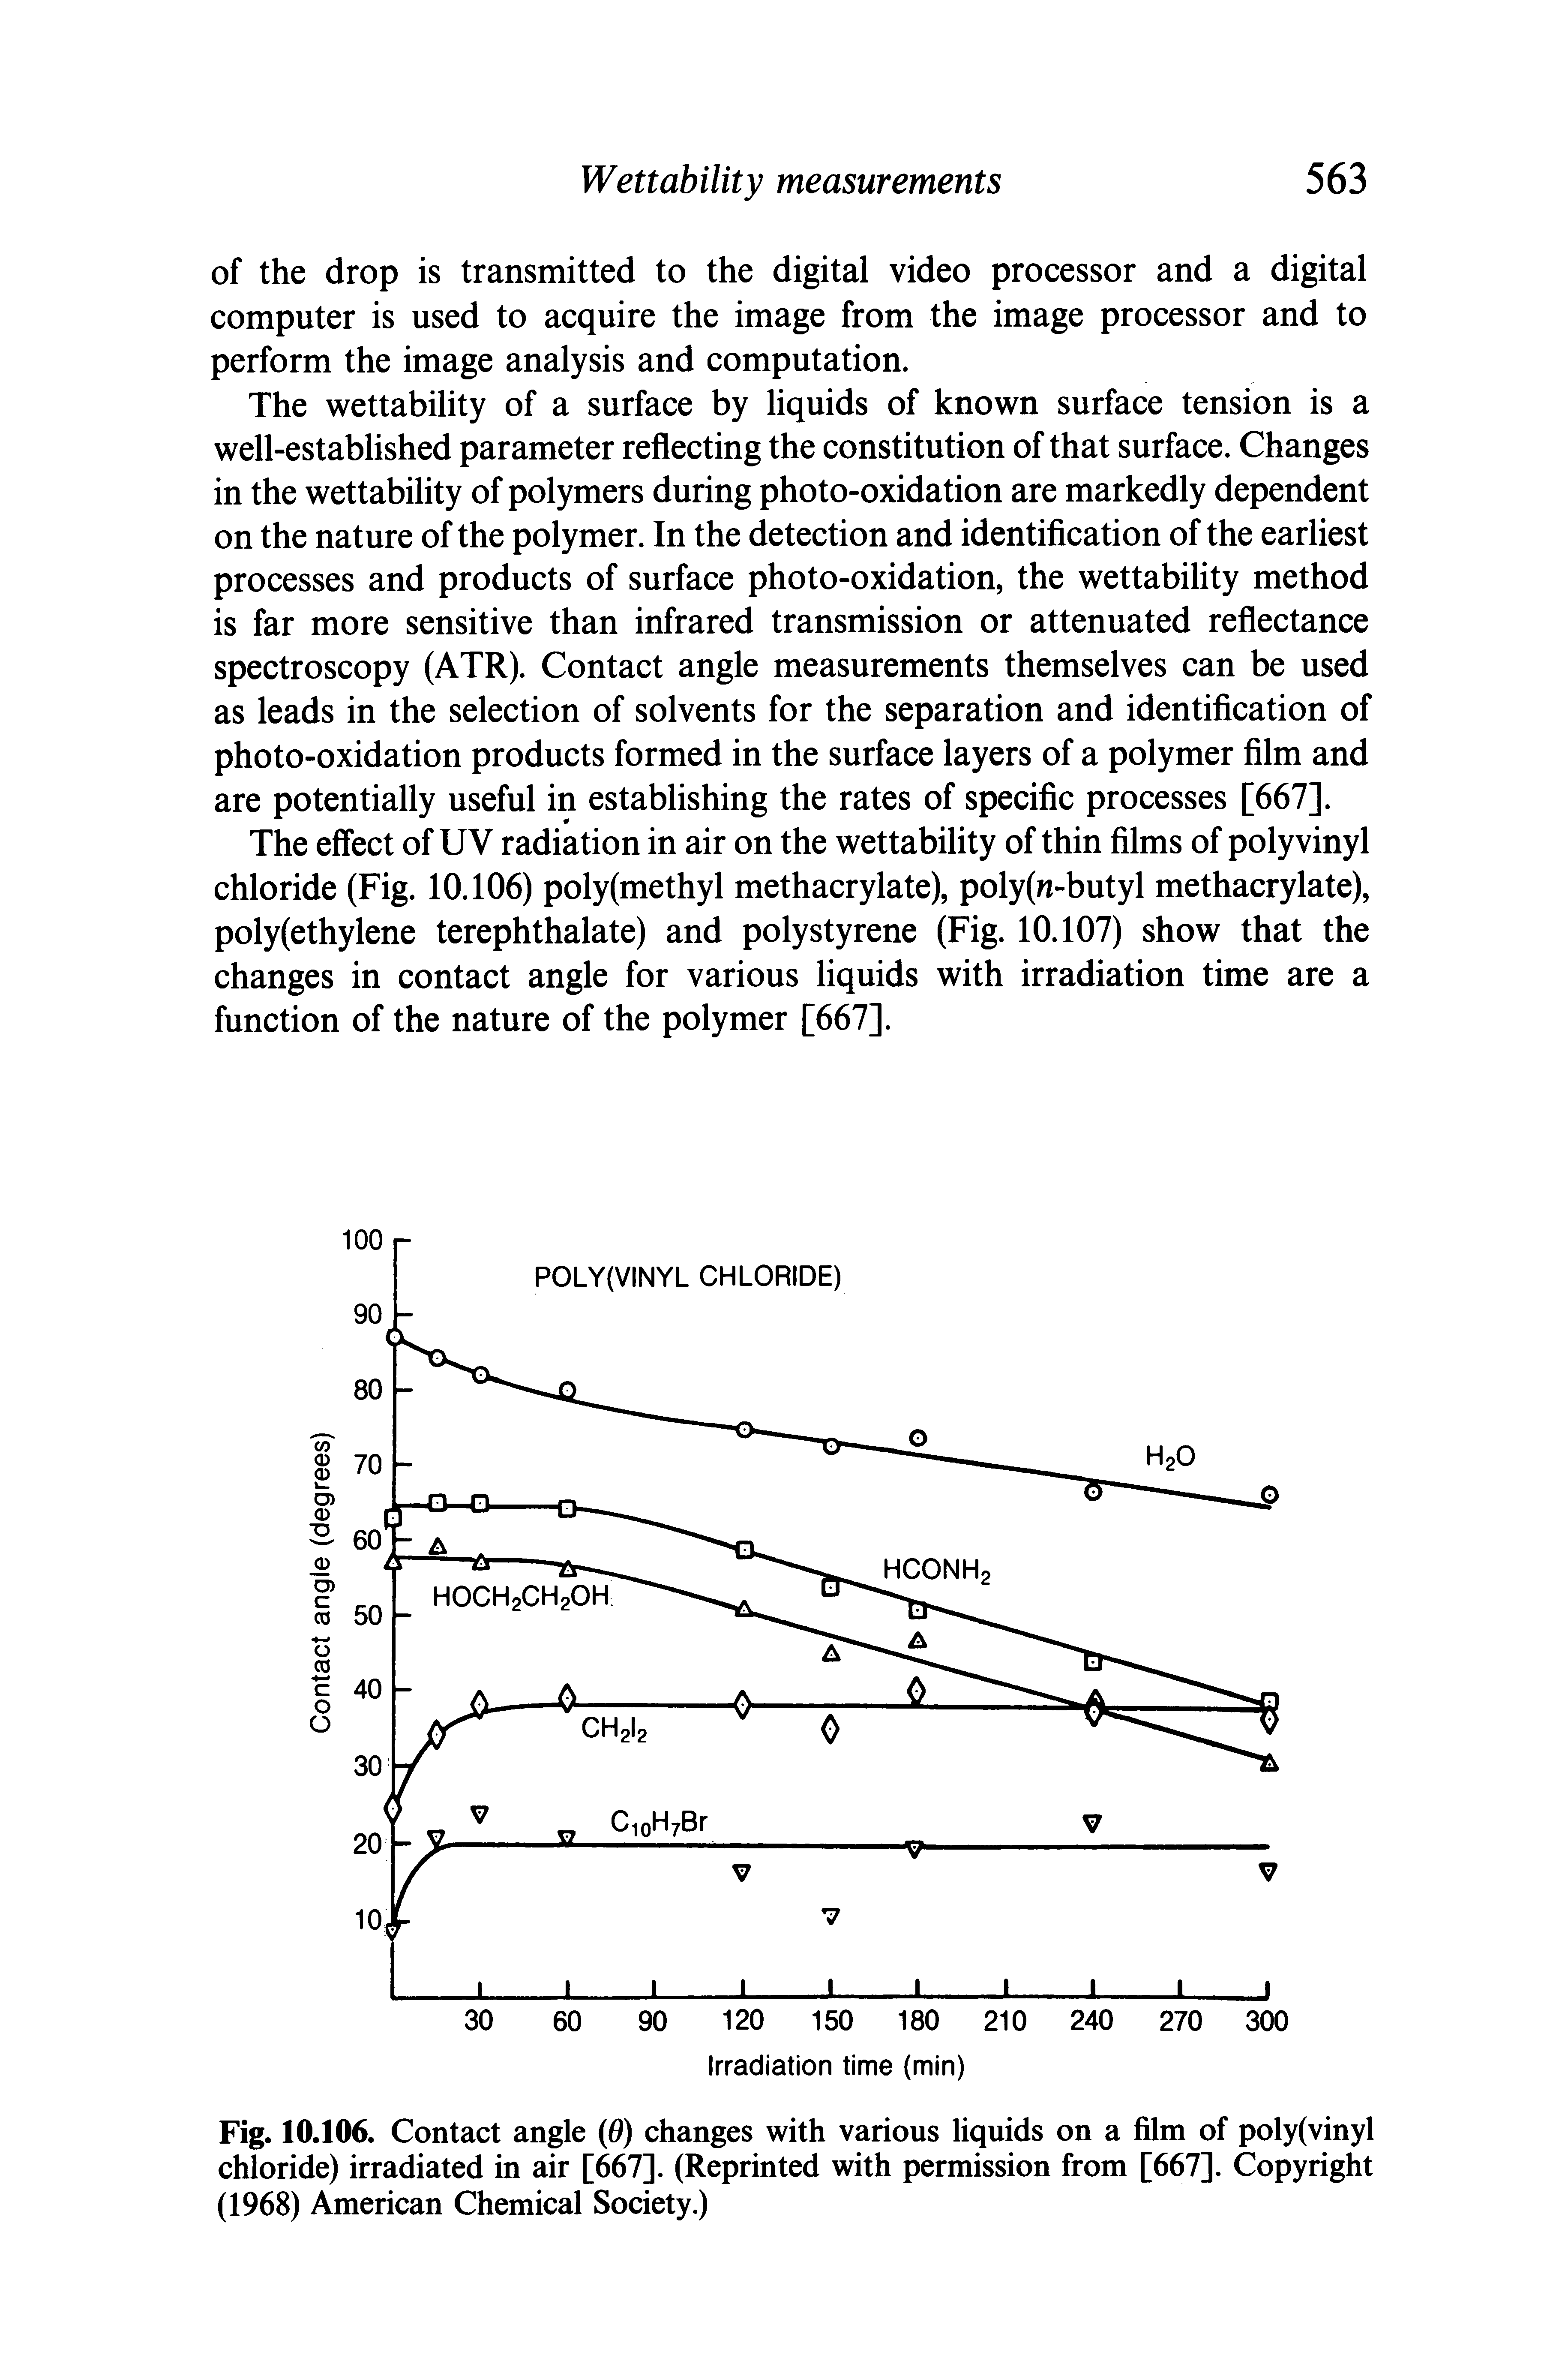 Fig. 10.106. Contact angle 0) changes with various liquids on a film of poly(vinyl chloride) irradiated in air [667]. (Reprinted with permission from [667]. Copyright (1968) American Chemical Society.)...